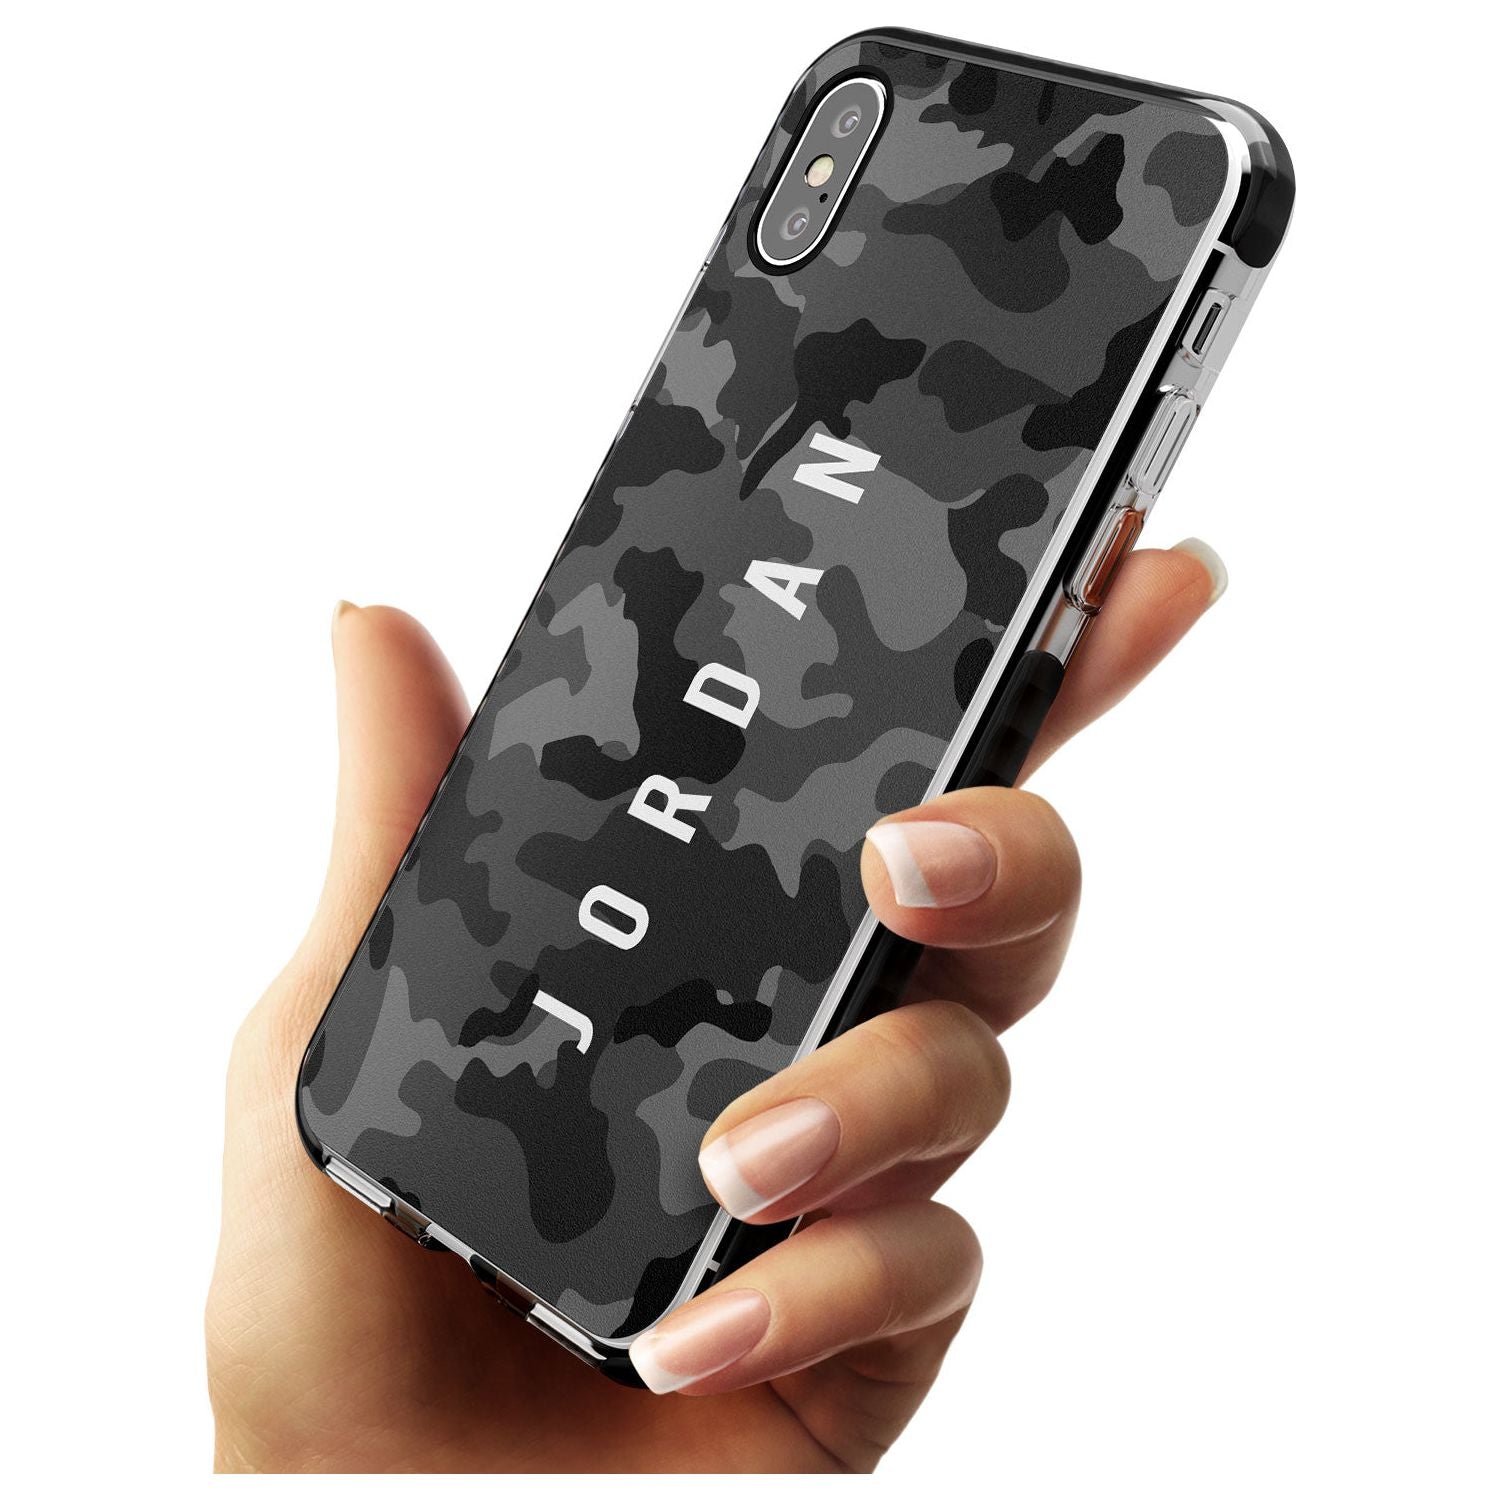 Small Vertical Name Personalised Black Camouflage Black Impact Phone Case for iPhone X XS Max XR